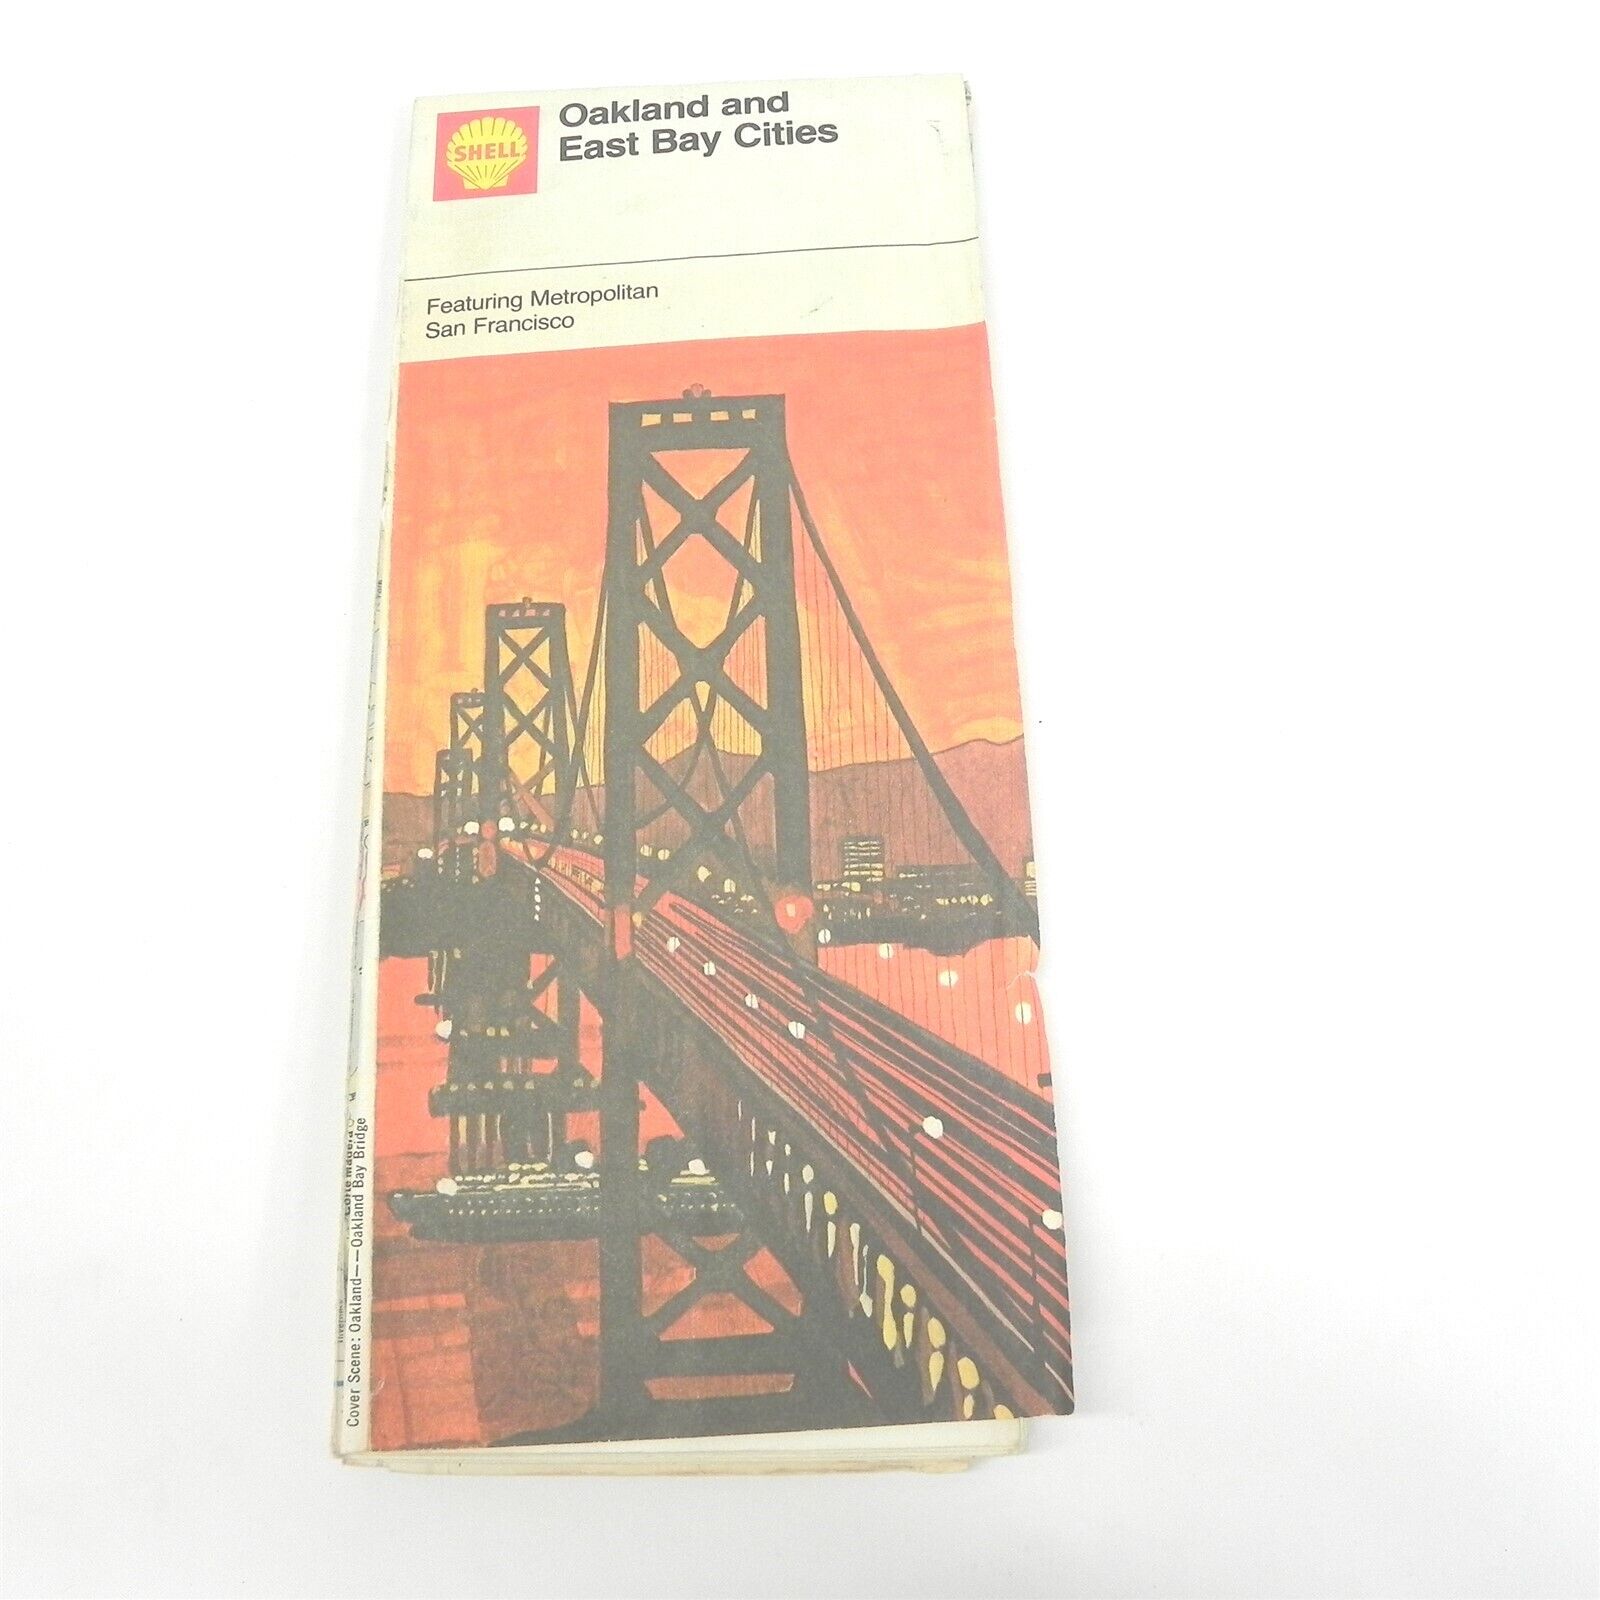 VINTAGE 1972 SHELL OIL COMPANY MAP OF OAKLAND & EAST BAY CITIES TOURING GUIDE